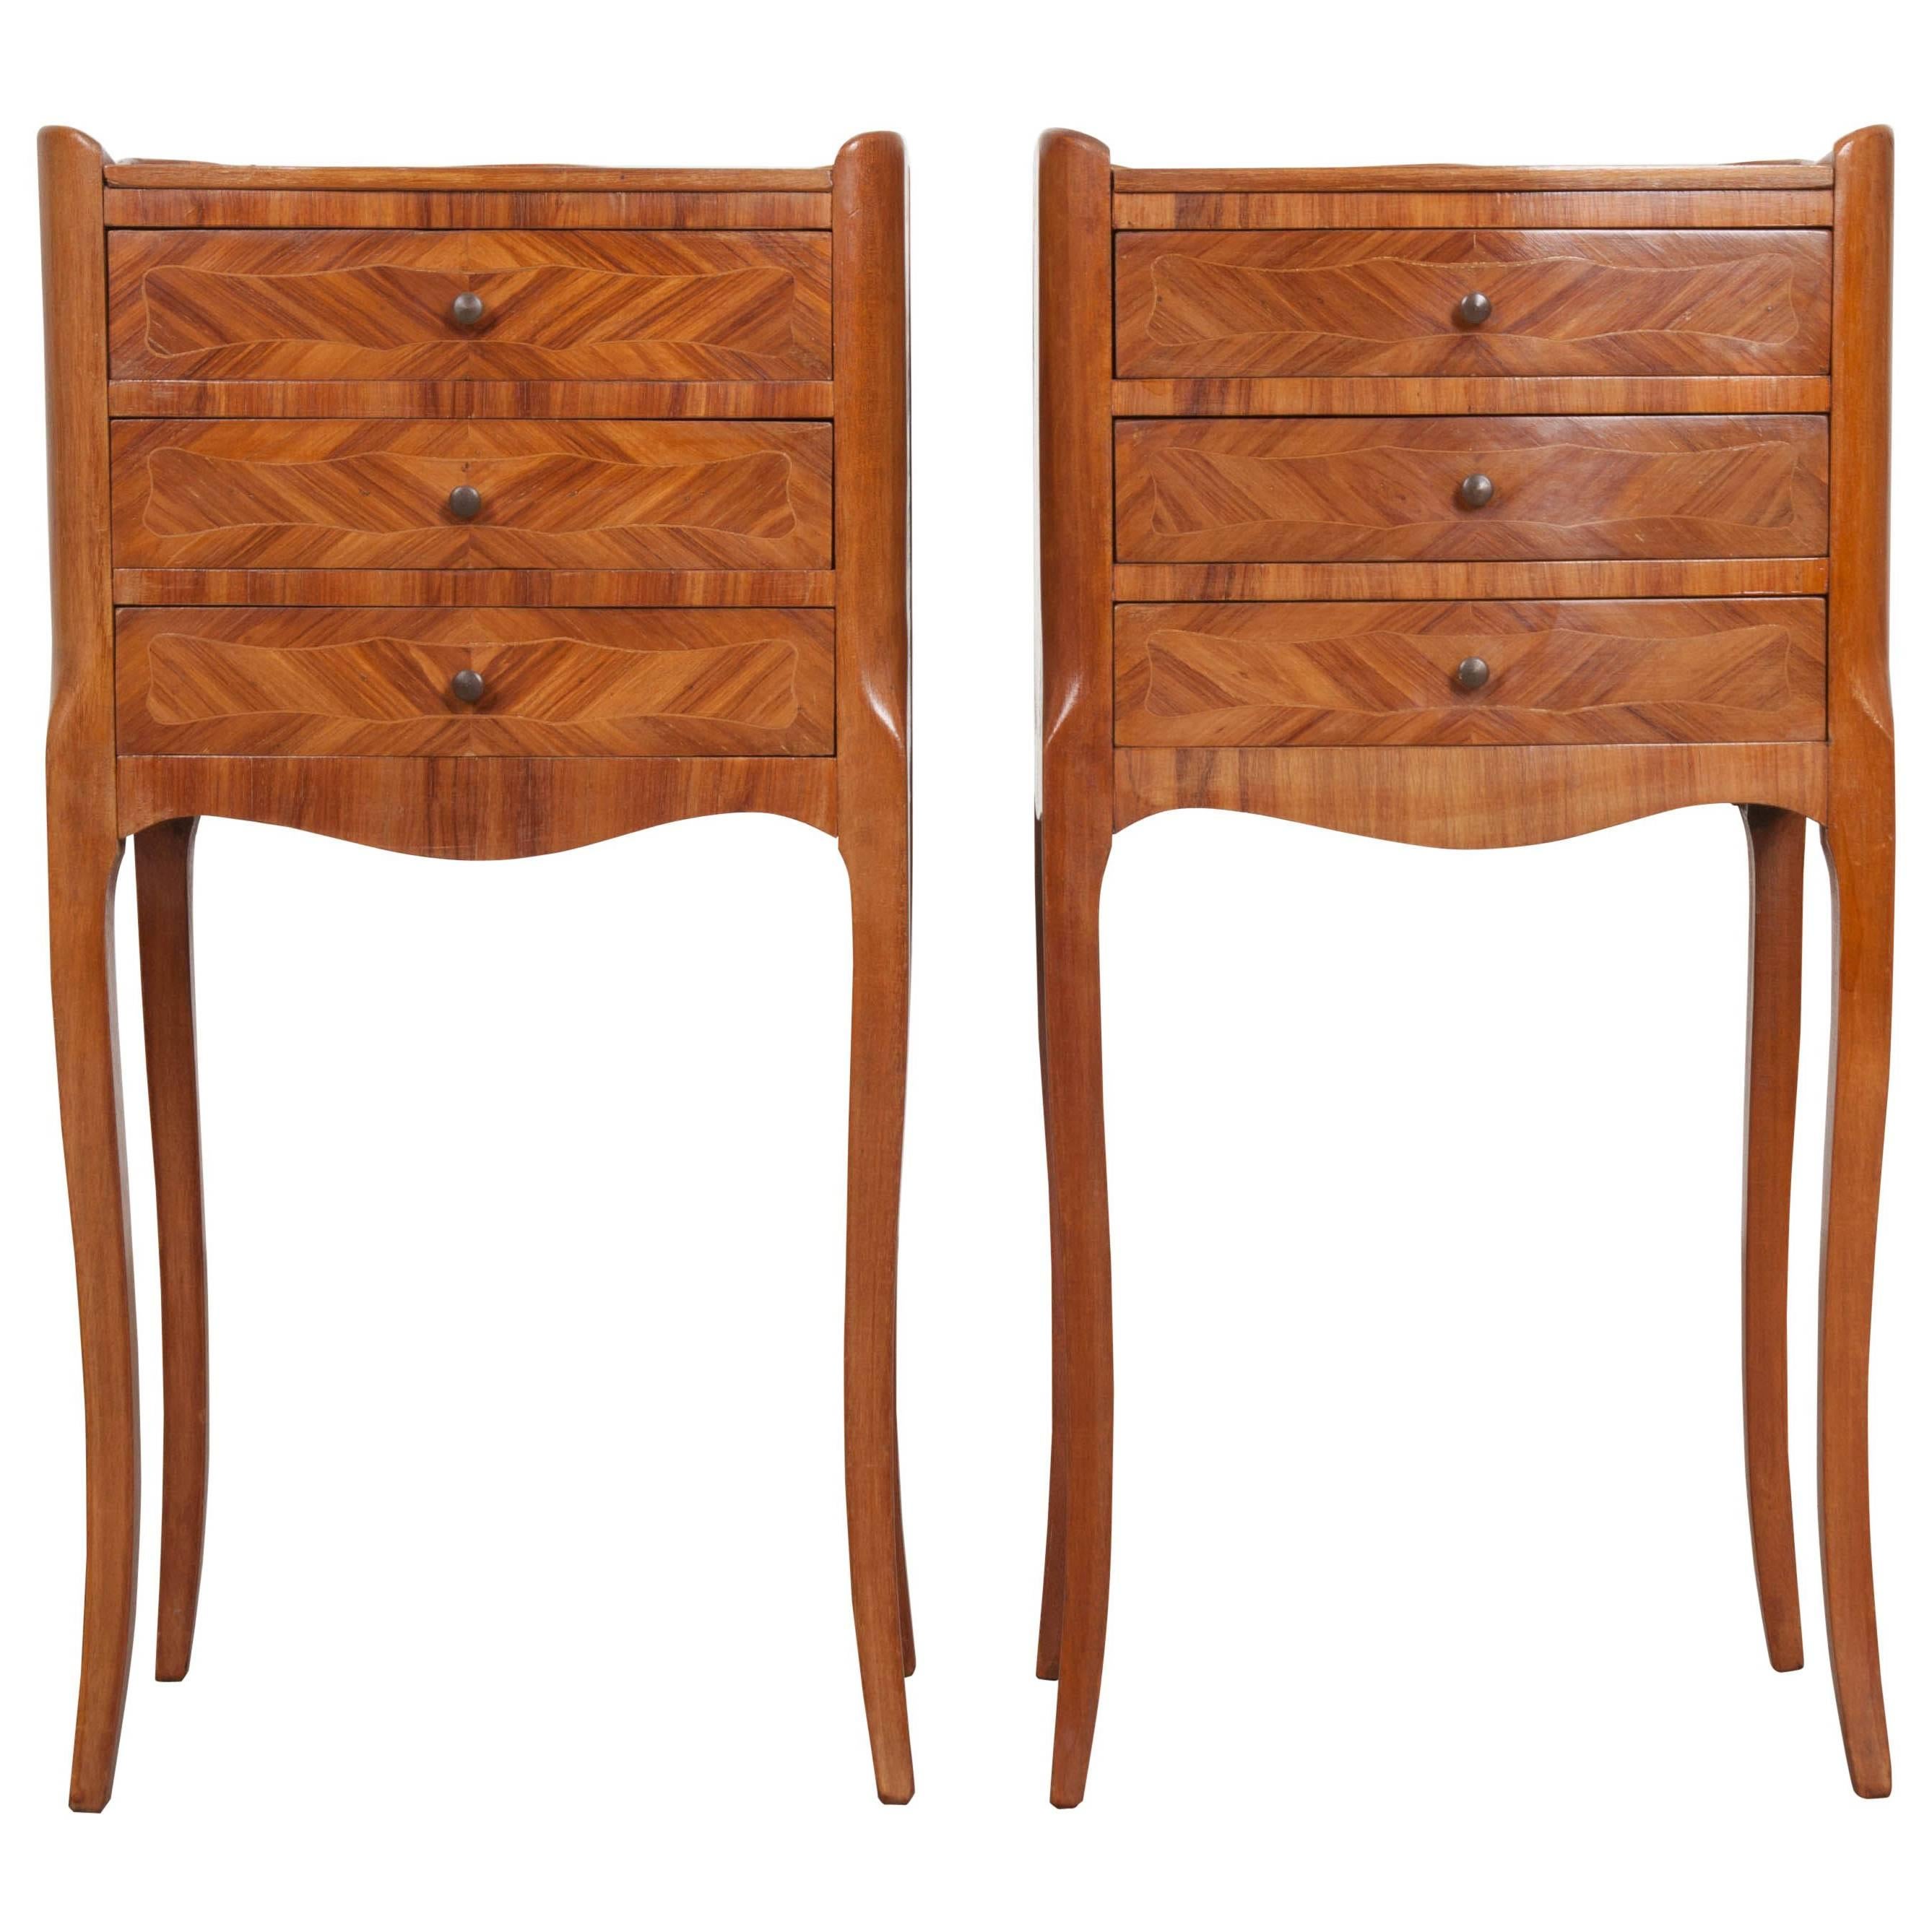 Pair of French Midcentury Marquetry Bedside Tables